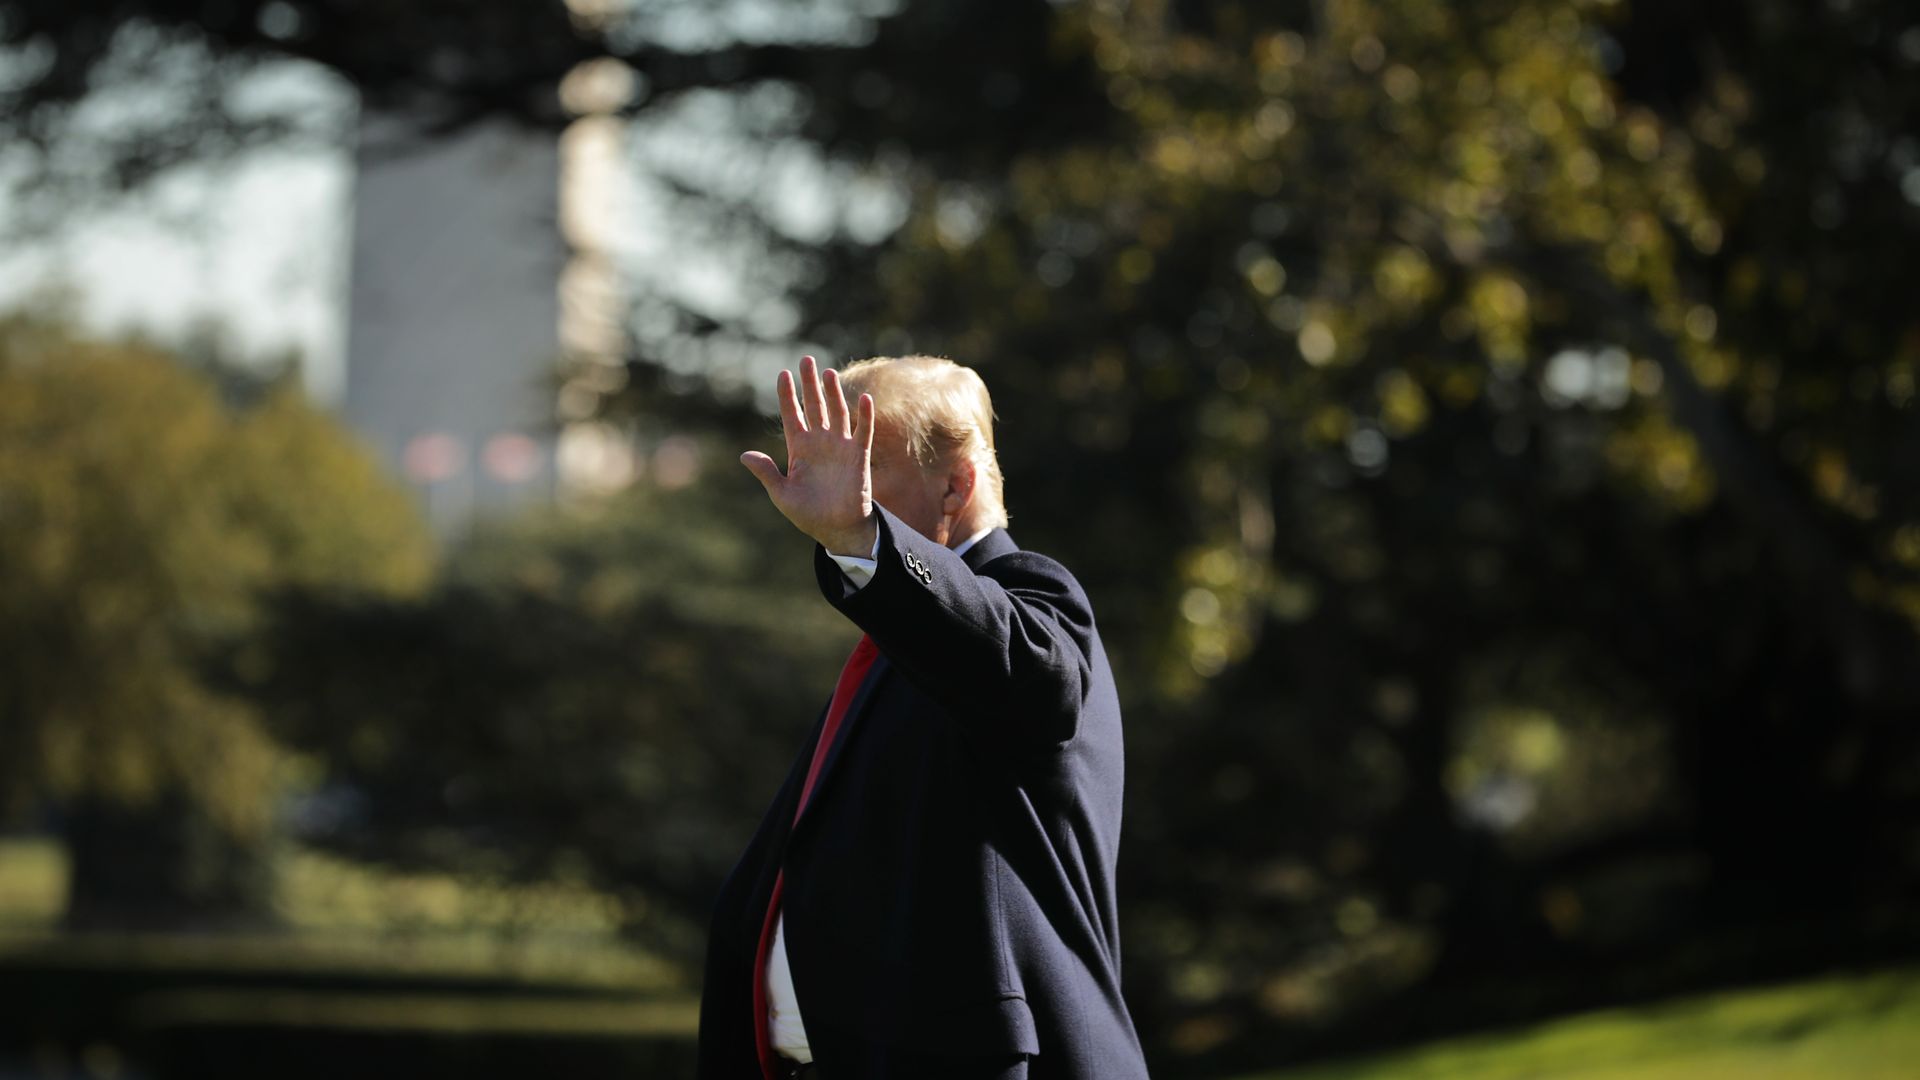 In this image, Trump waves at the camera while walking, which blocks out his face. The Washington Monument can be seen behind him.